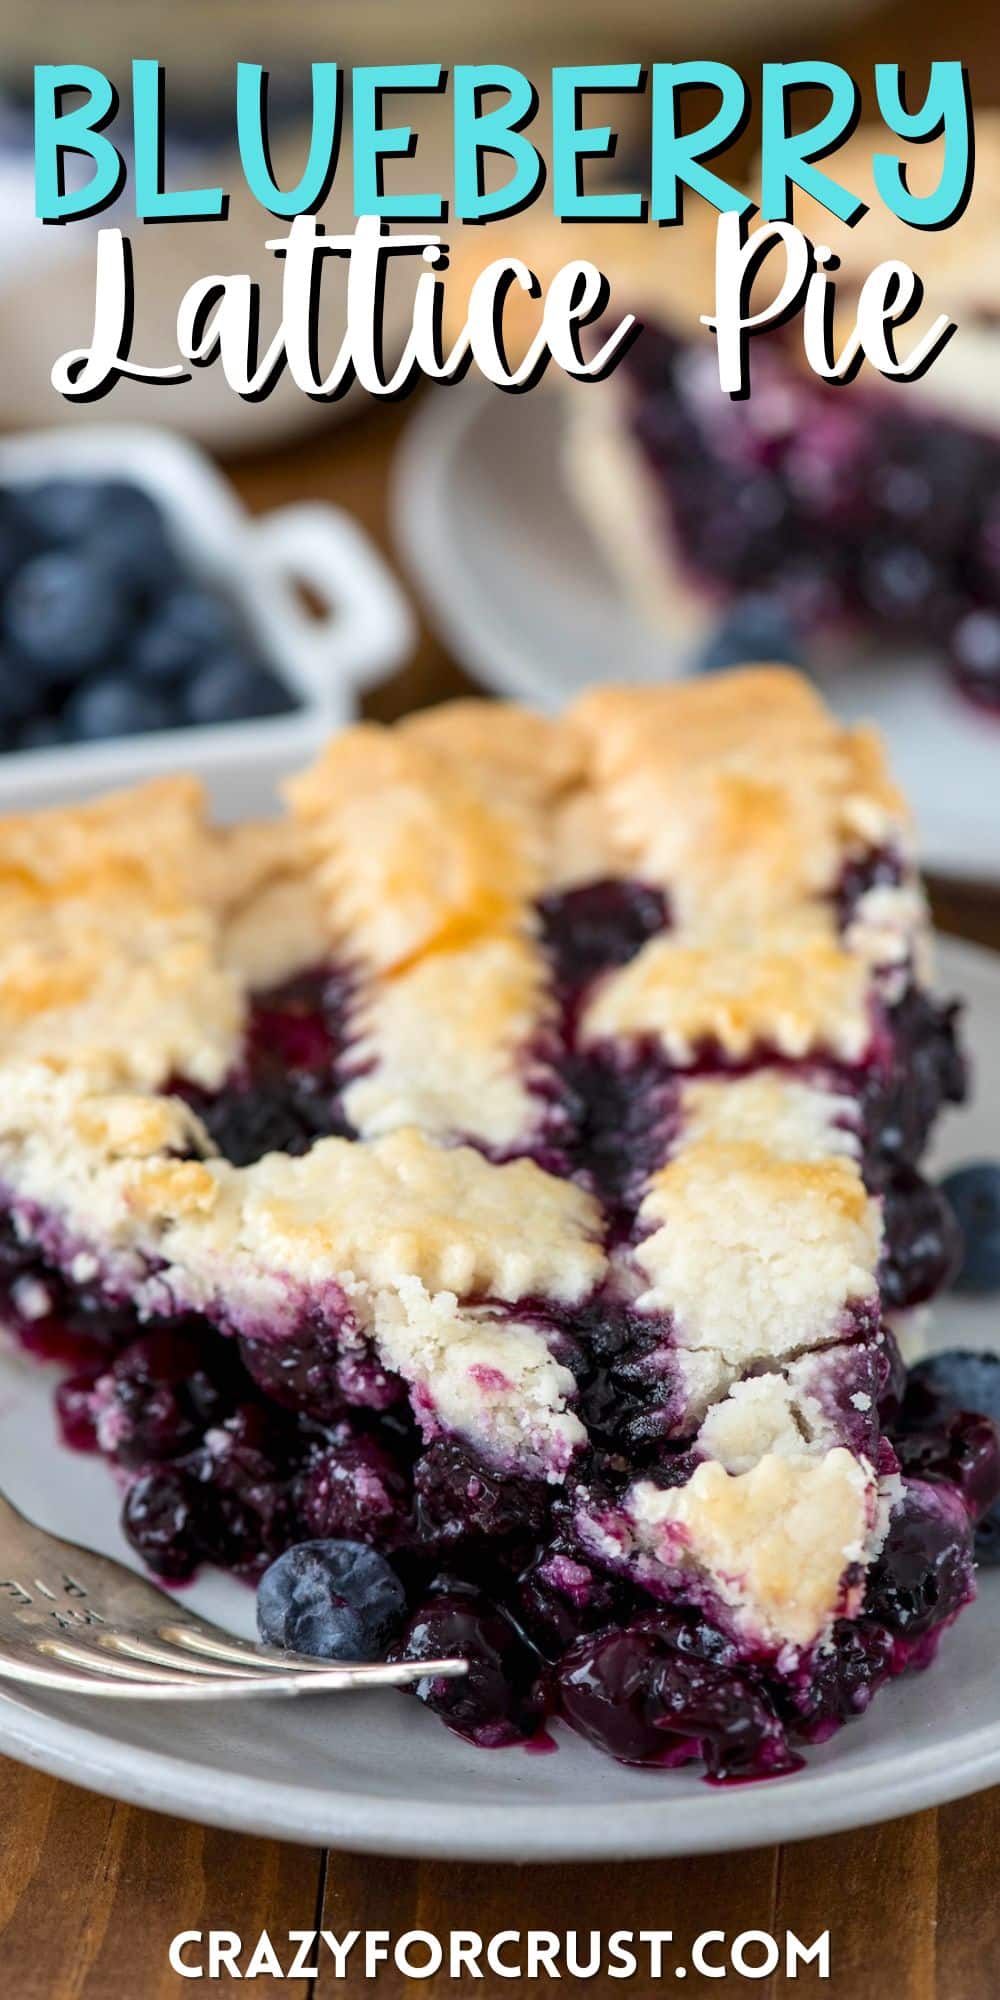 one slice of pie with blueberries baked in and with lattice design on top with words on the image.